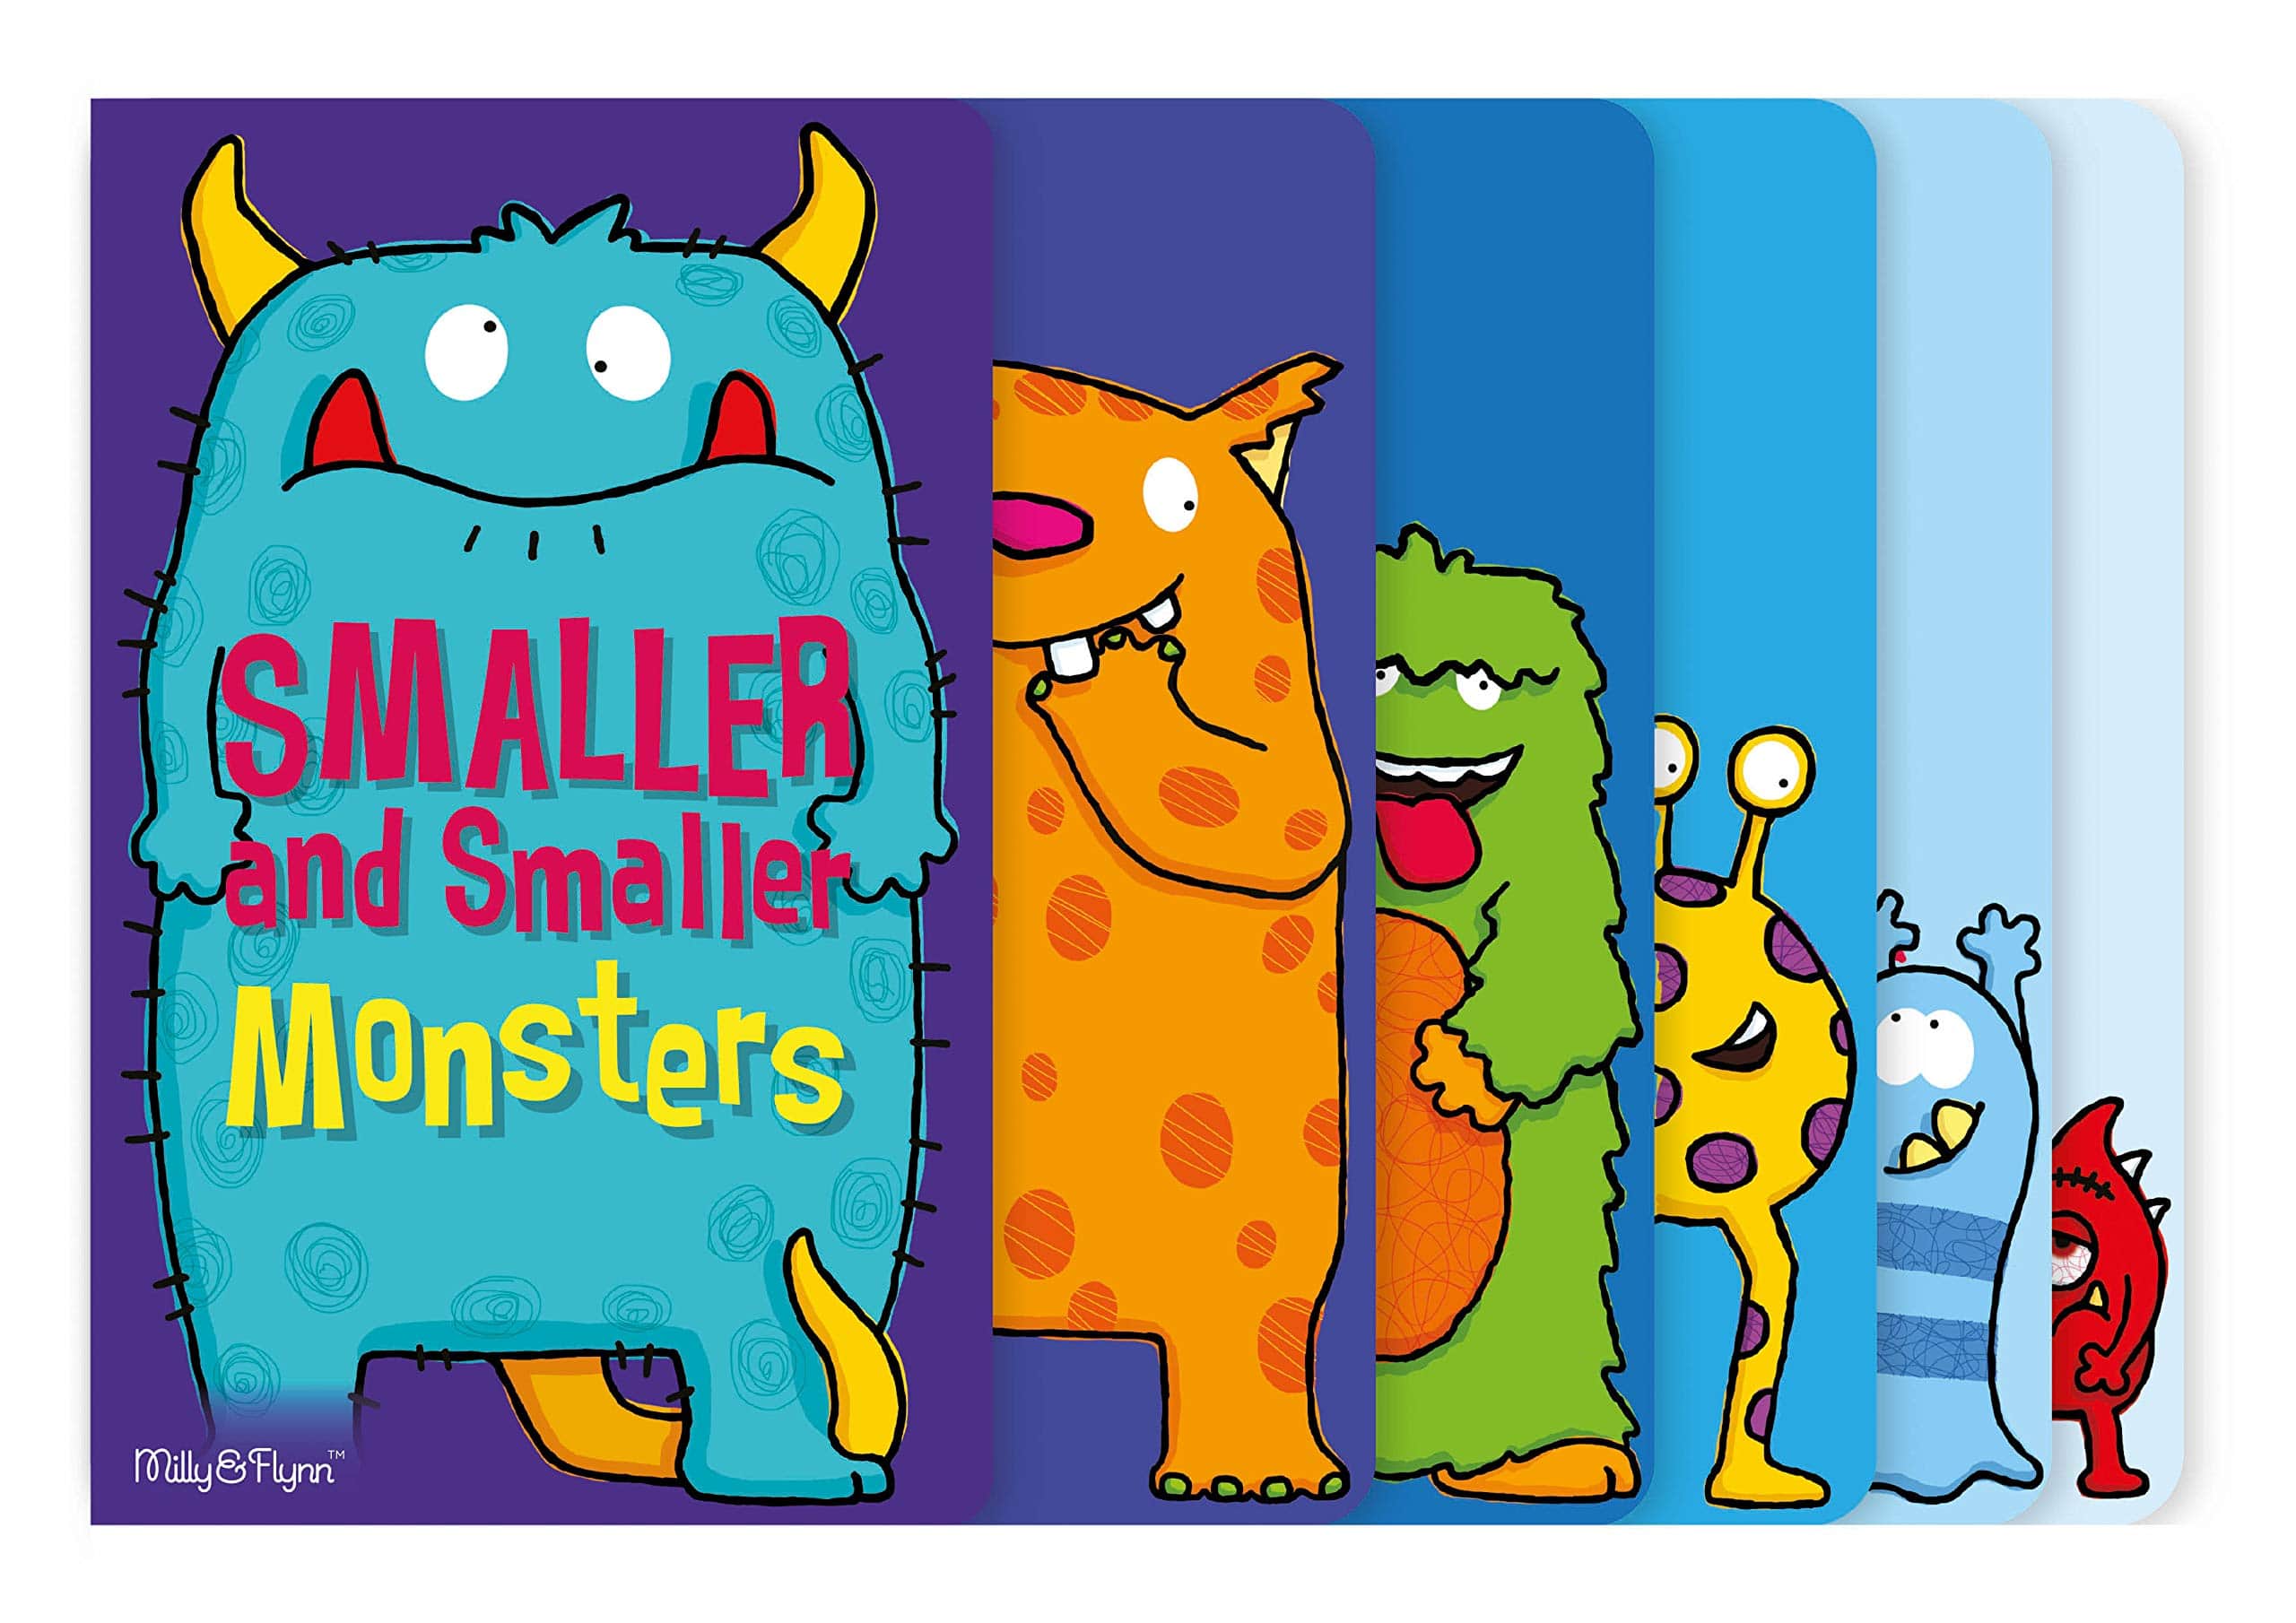 IMG : Smaller and smaller Monsters